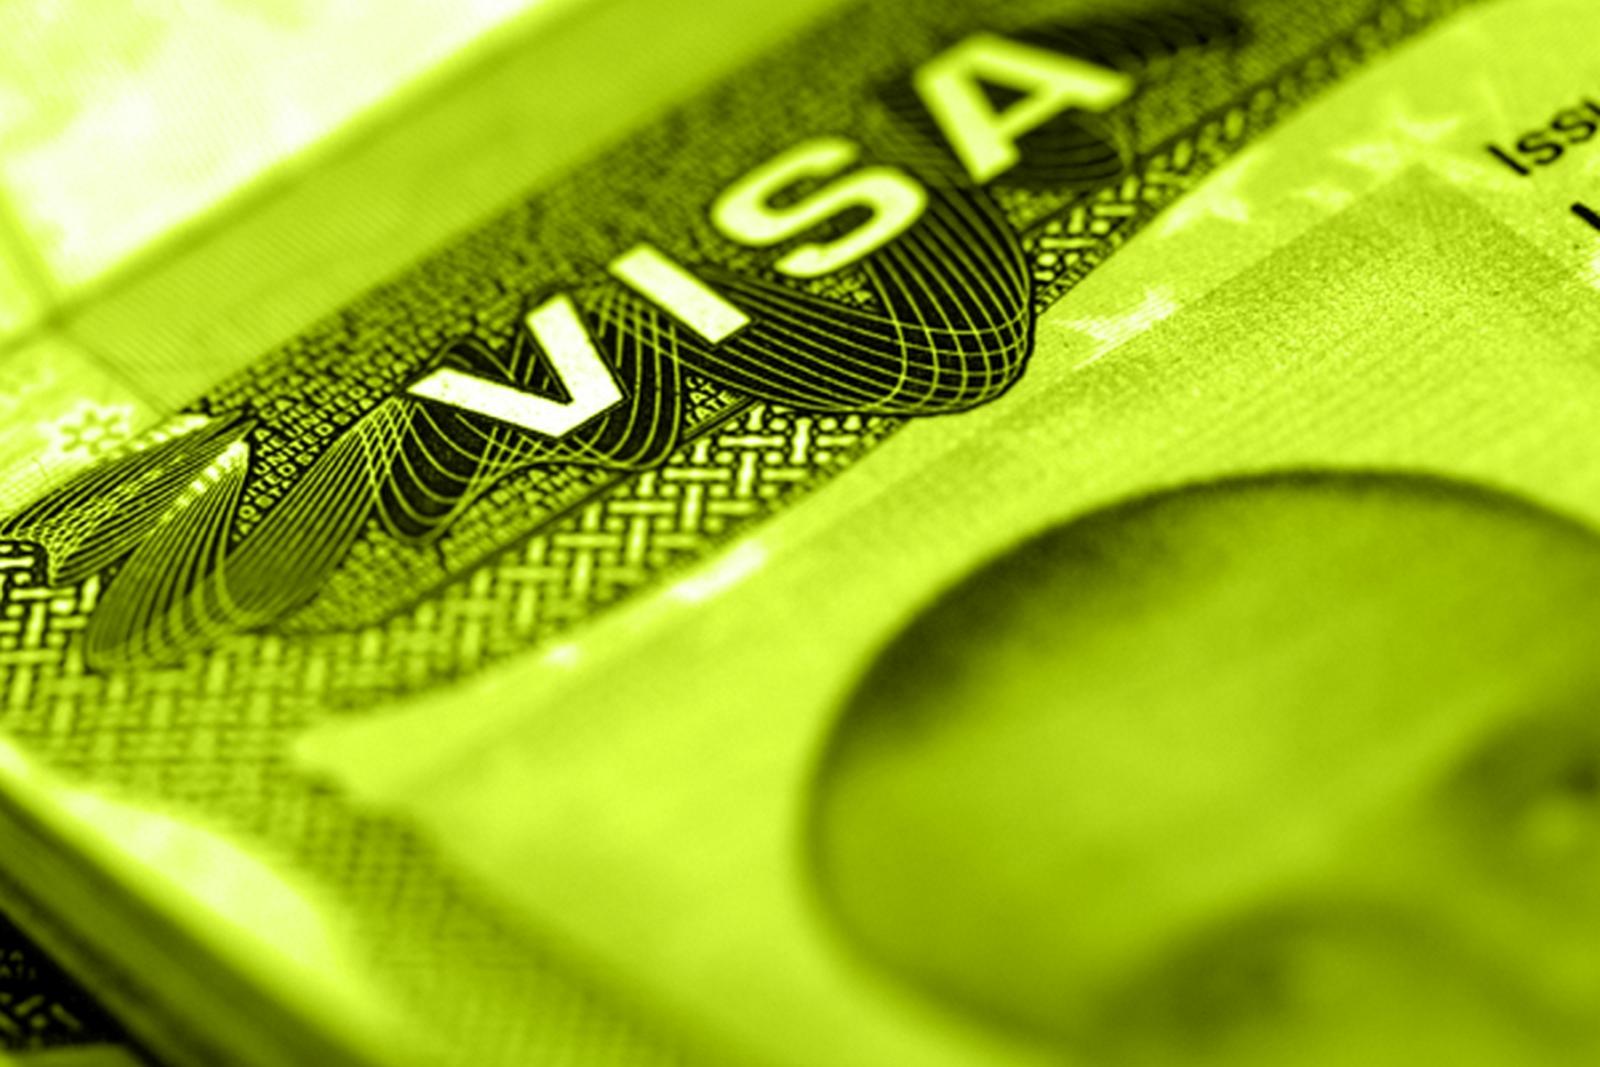 Need help with your visa?